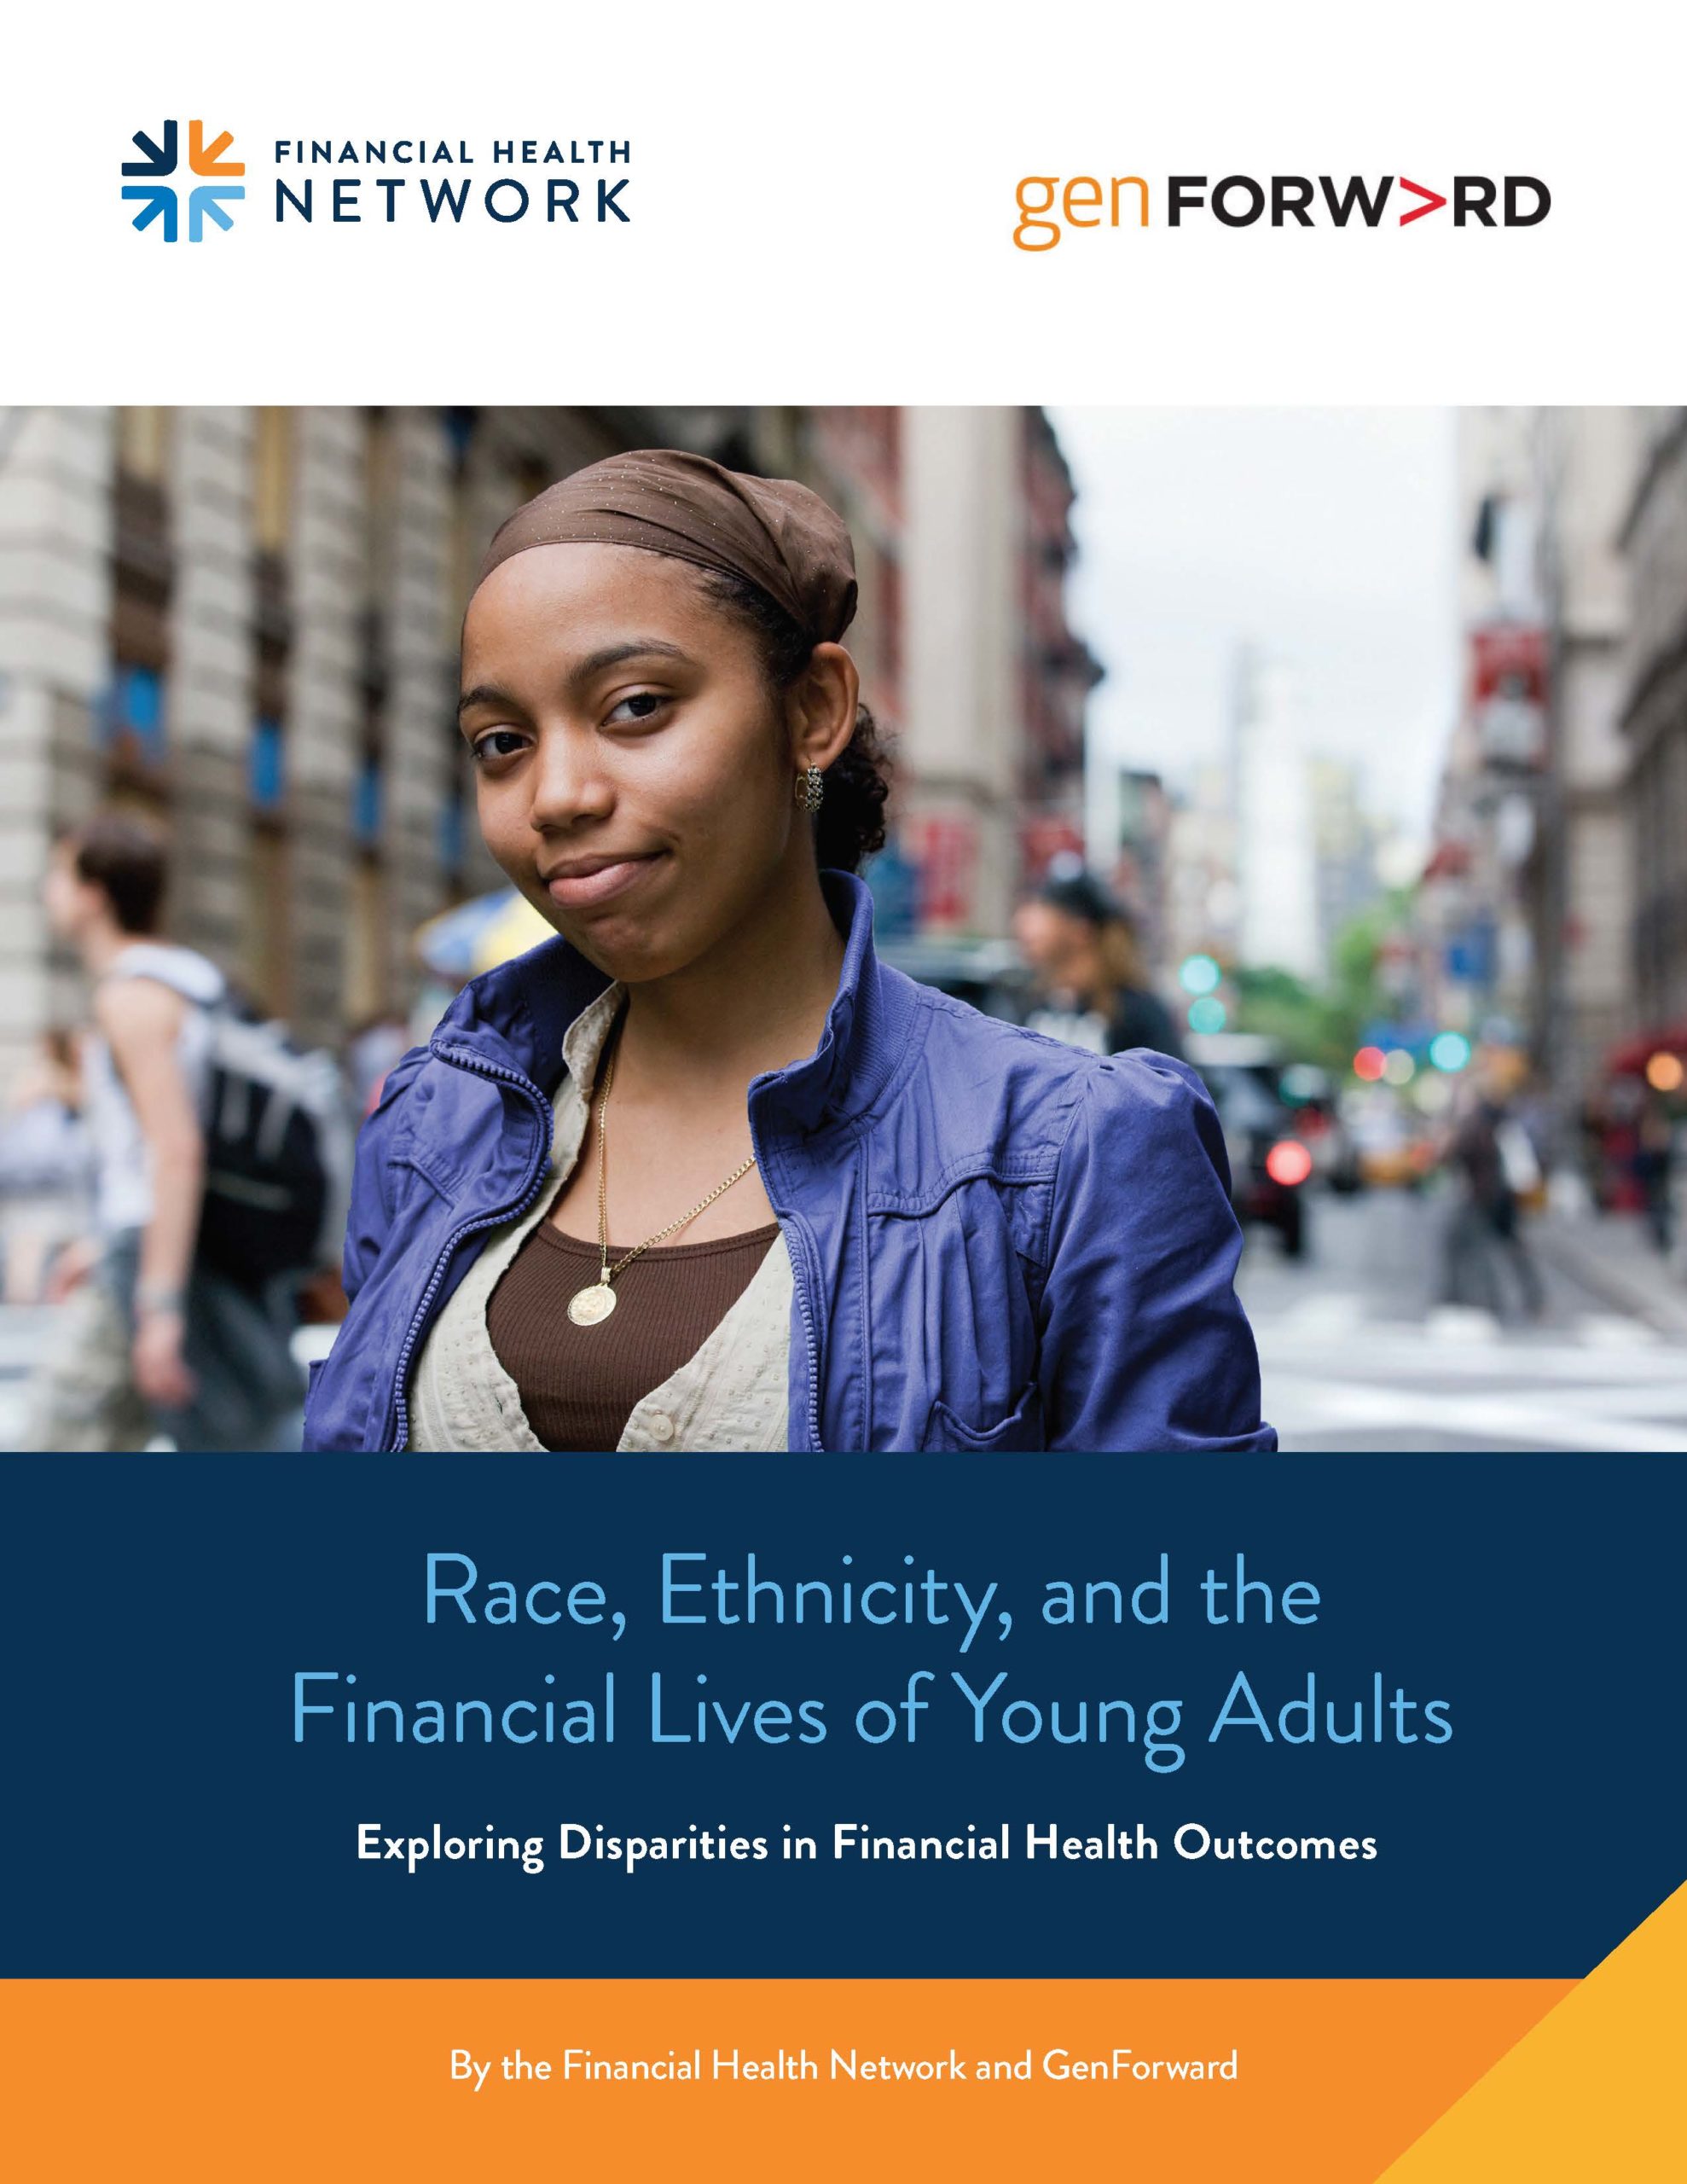 Report — Race, Ethnicity, and the Financial Lives of Young Adults